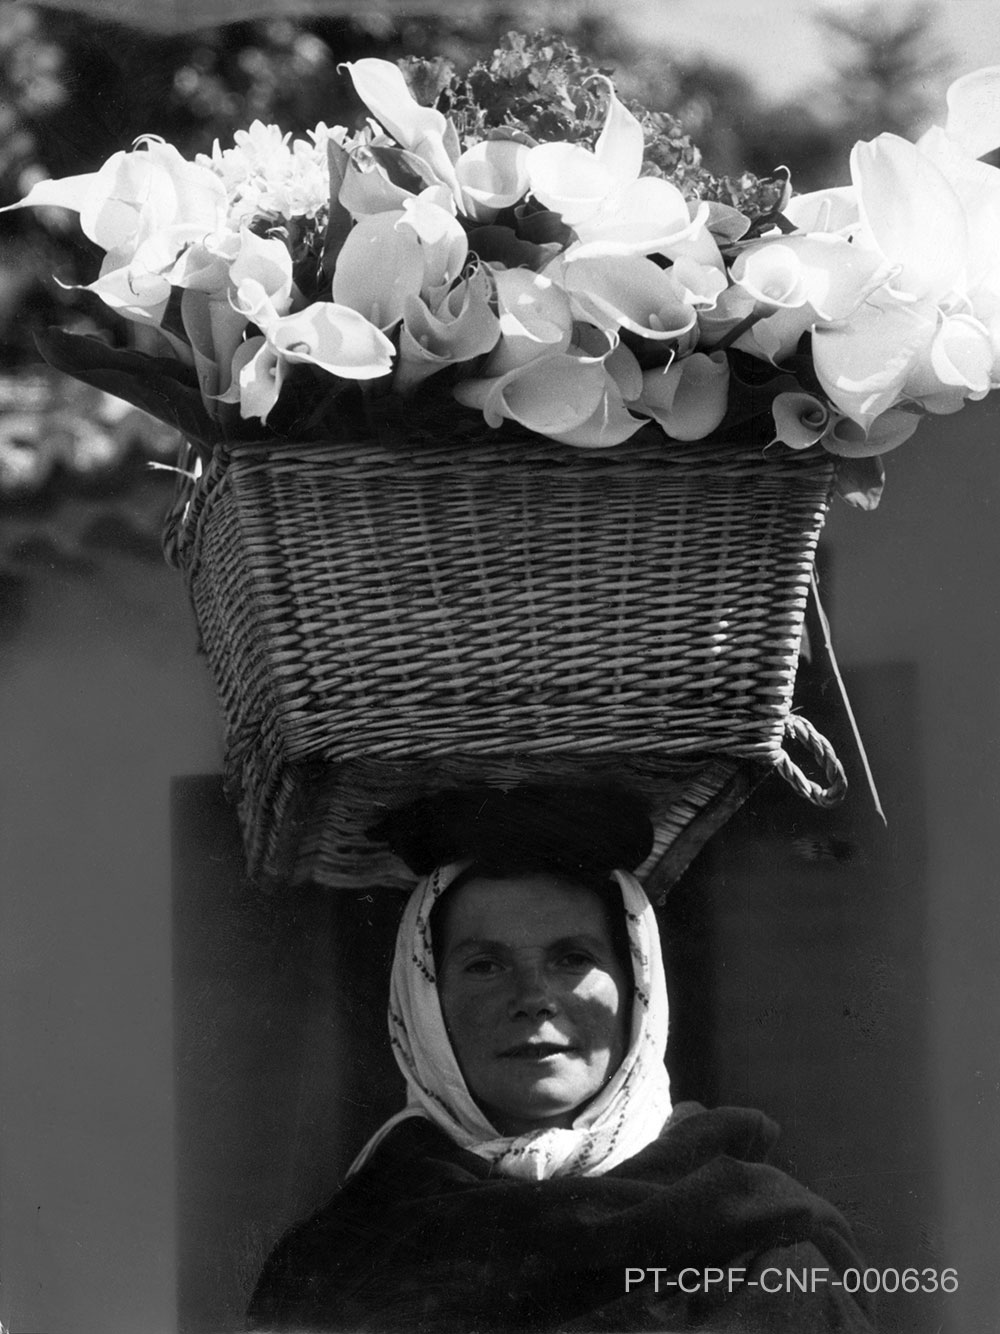 Lady, Basket of Calla Lilies on Head (Portugal), 1930s; PT/CPF/CNF/000636